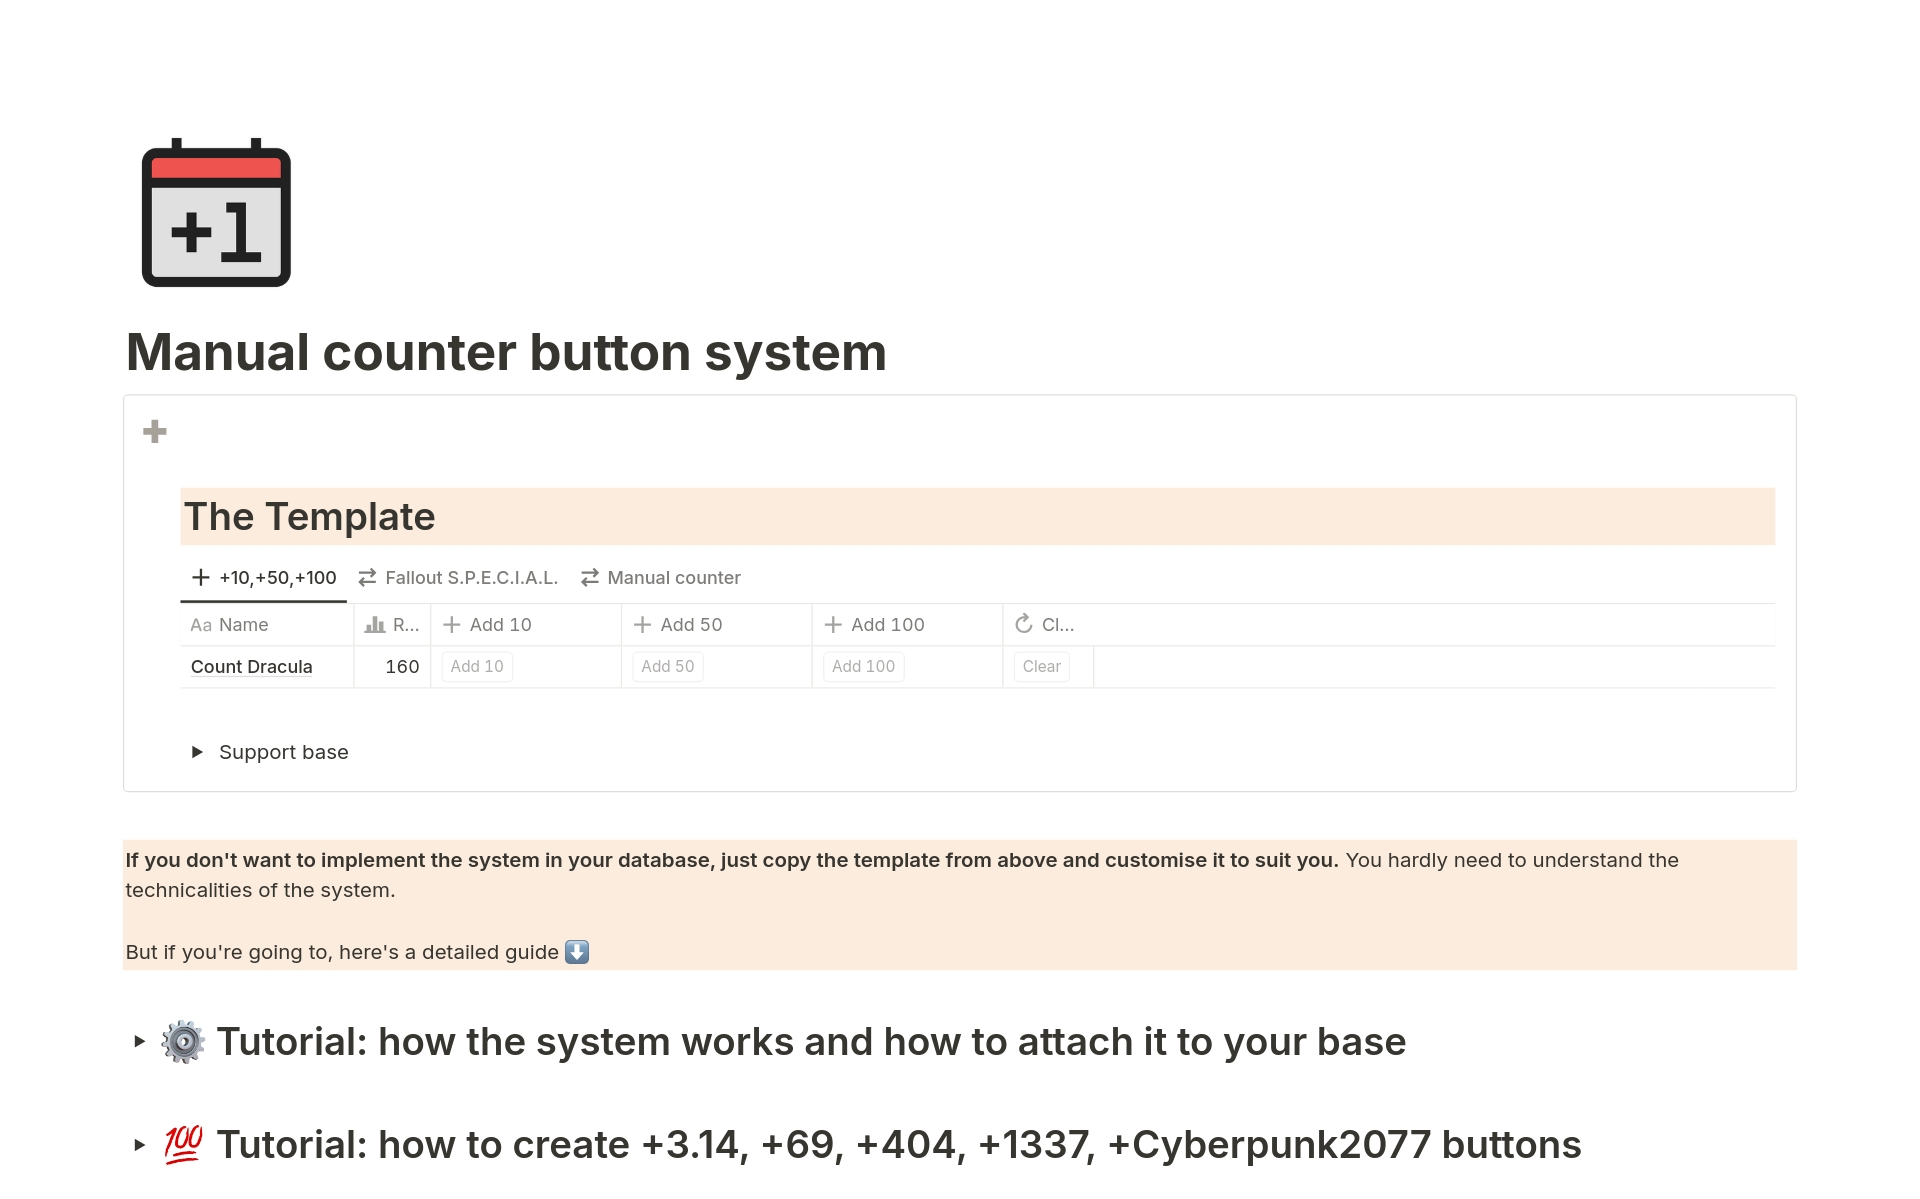 Manual Counter Button System is a template that includes a pre-configured manual counter and guides on how to modify and adapt it. It's useful for those who prefer manually adding values using buttons.